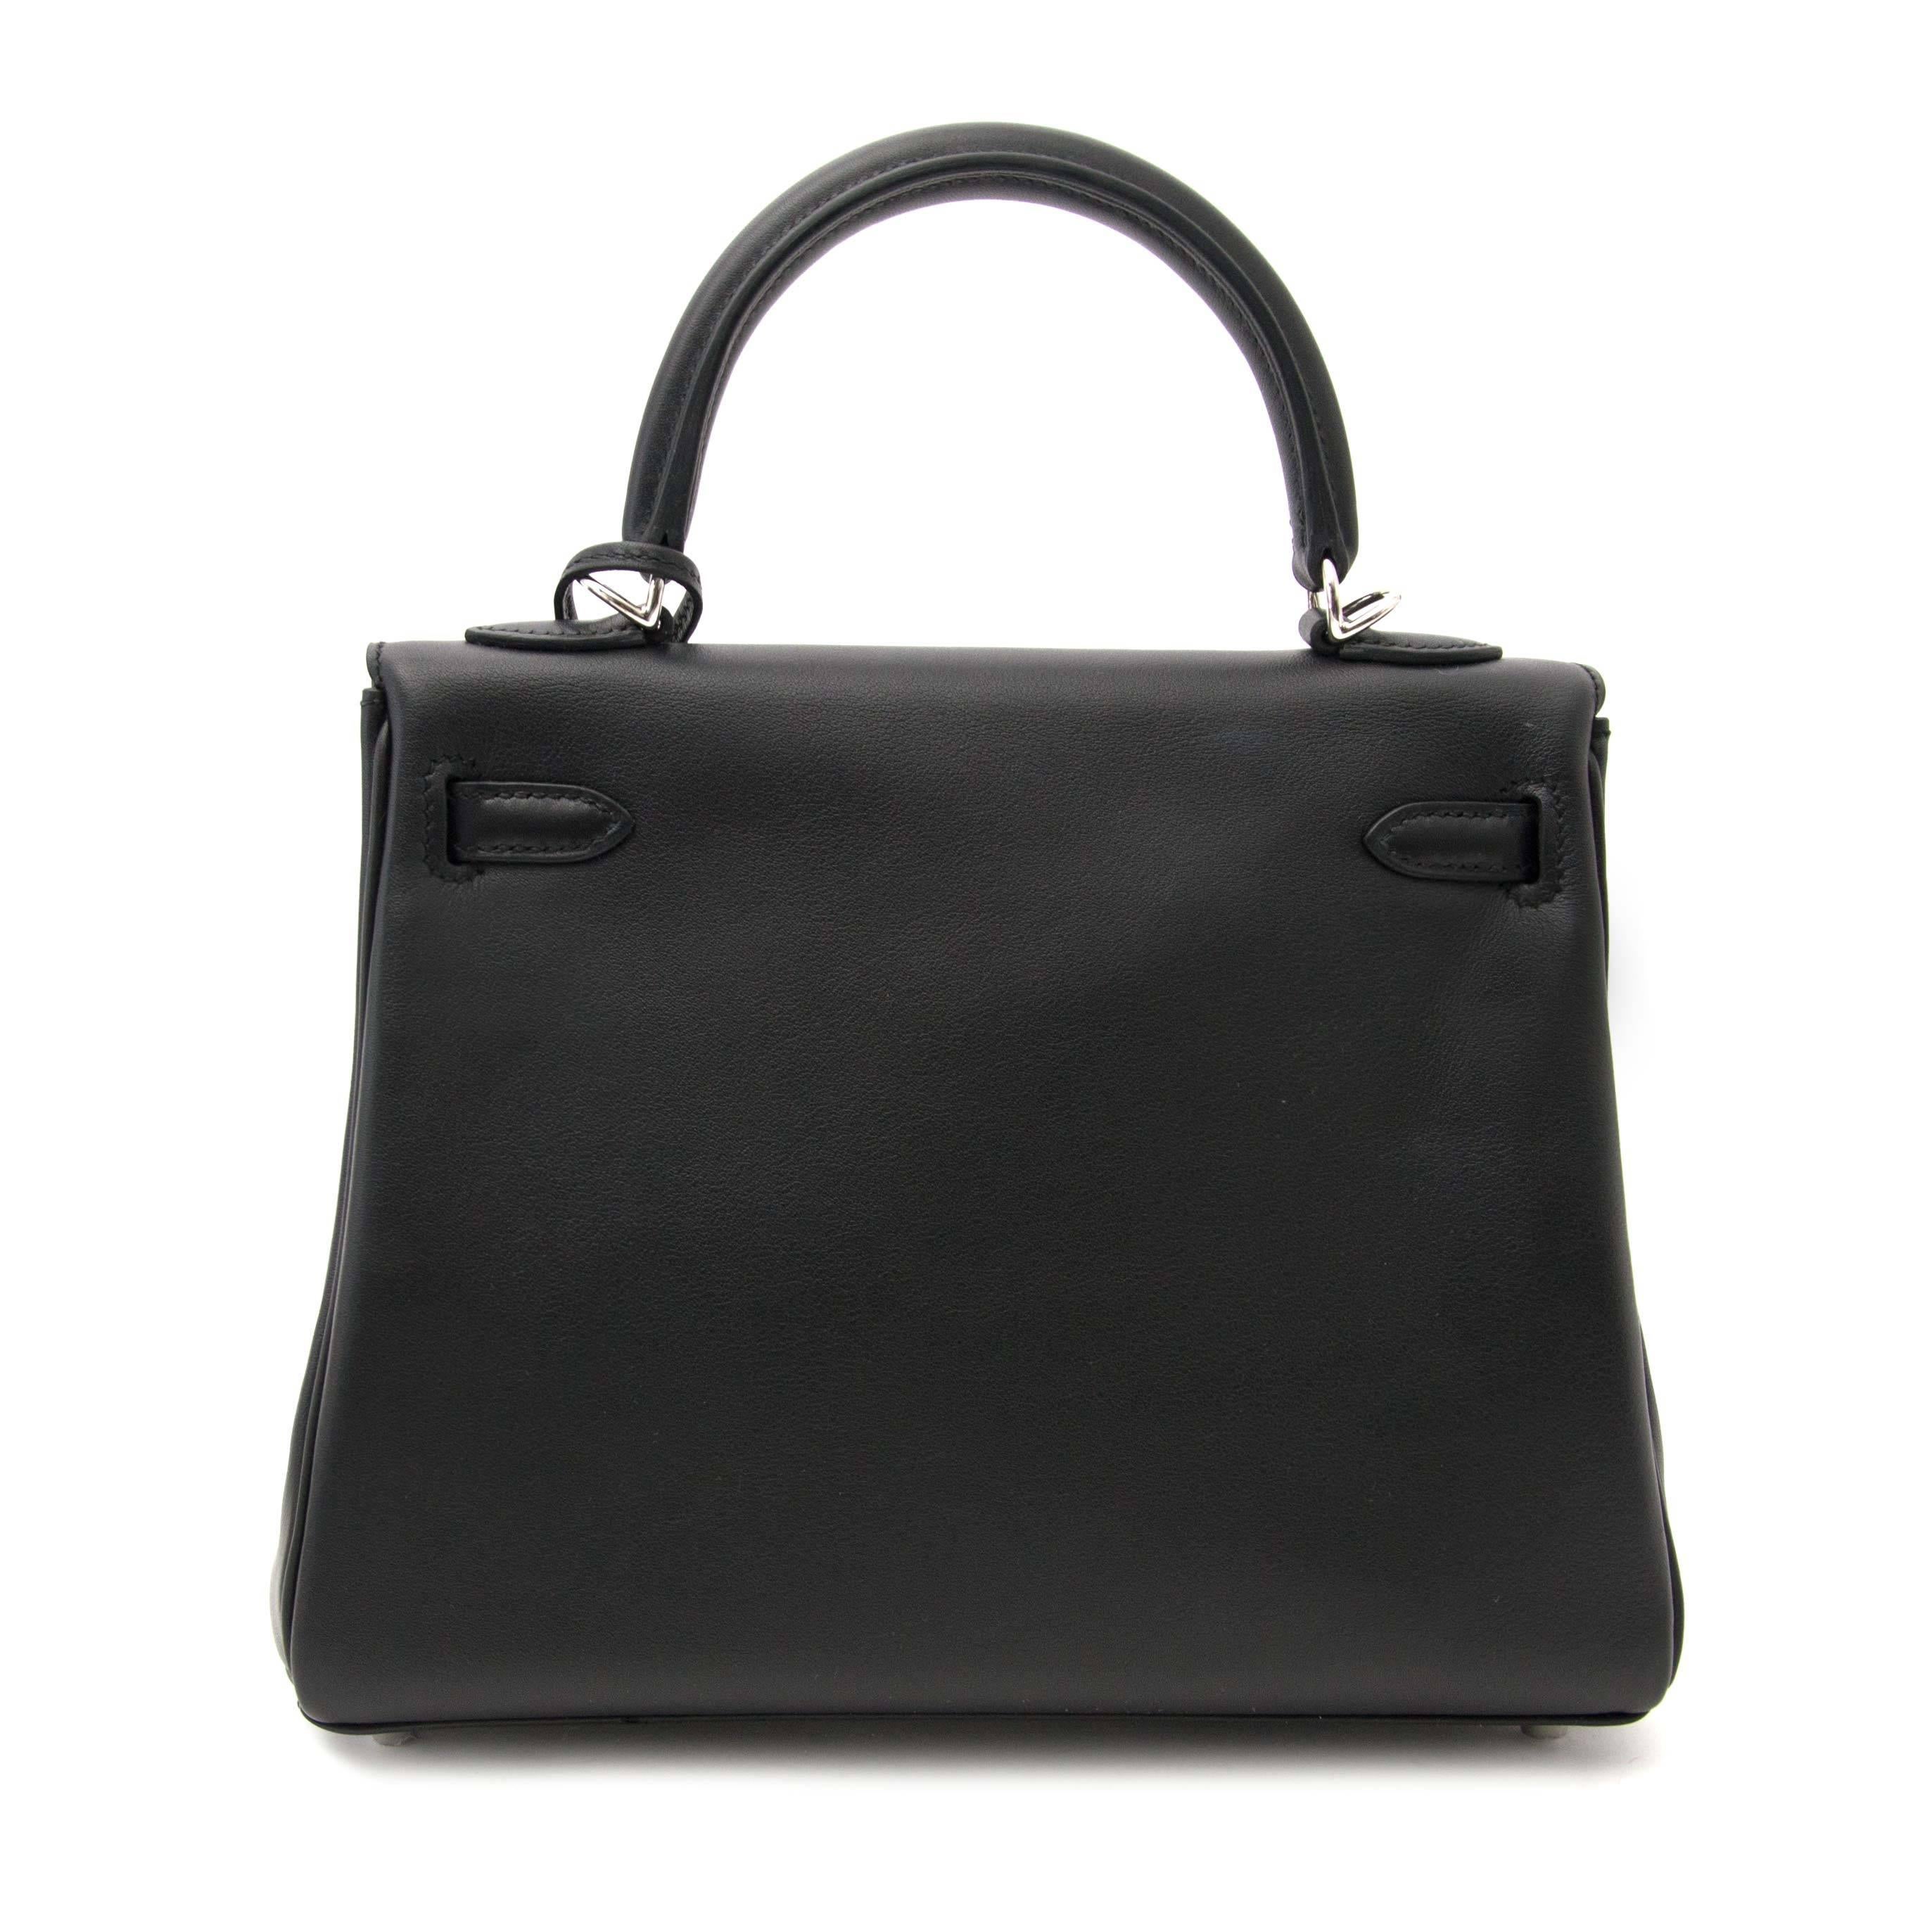 This Hermès Kelly Retourne 25 cm made out of swift leather in a timeless black color with palladium hardware.
Hermès swift leather is known for it's fine grain that is amazingly soft to touch, but is also a luminous type of leather.
A matching